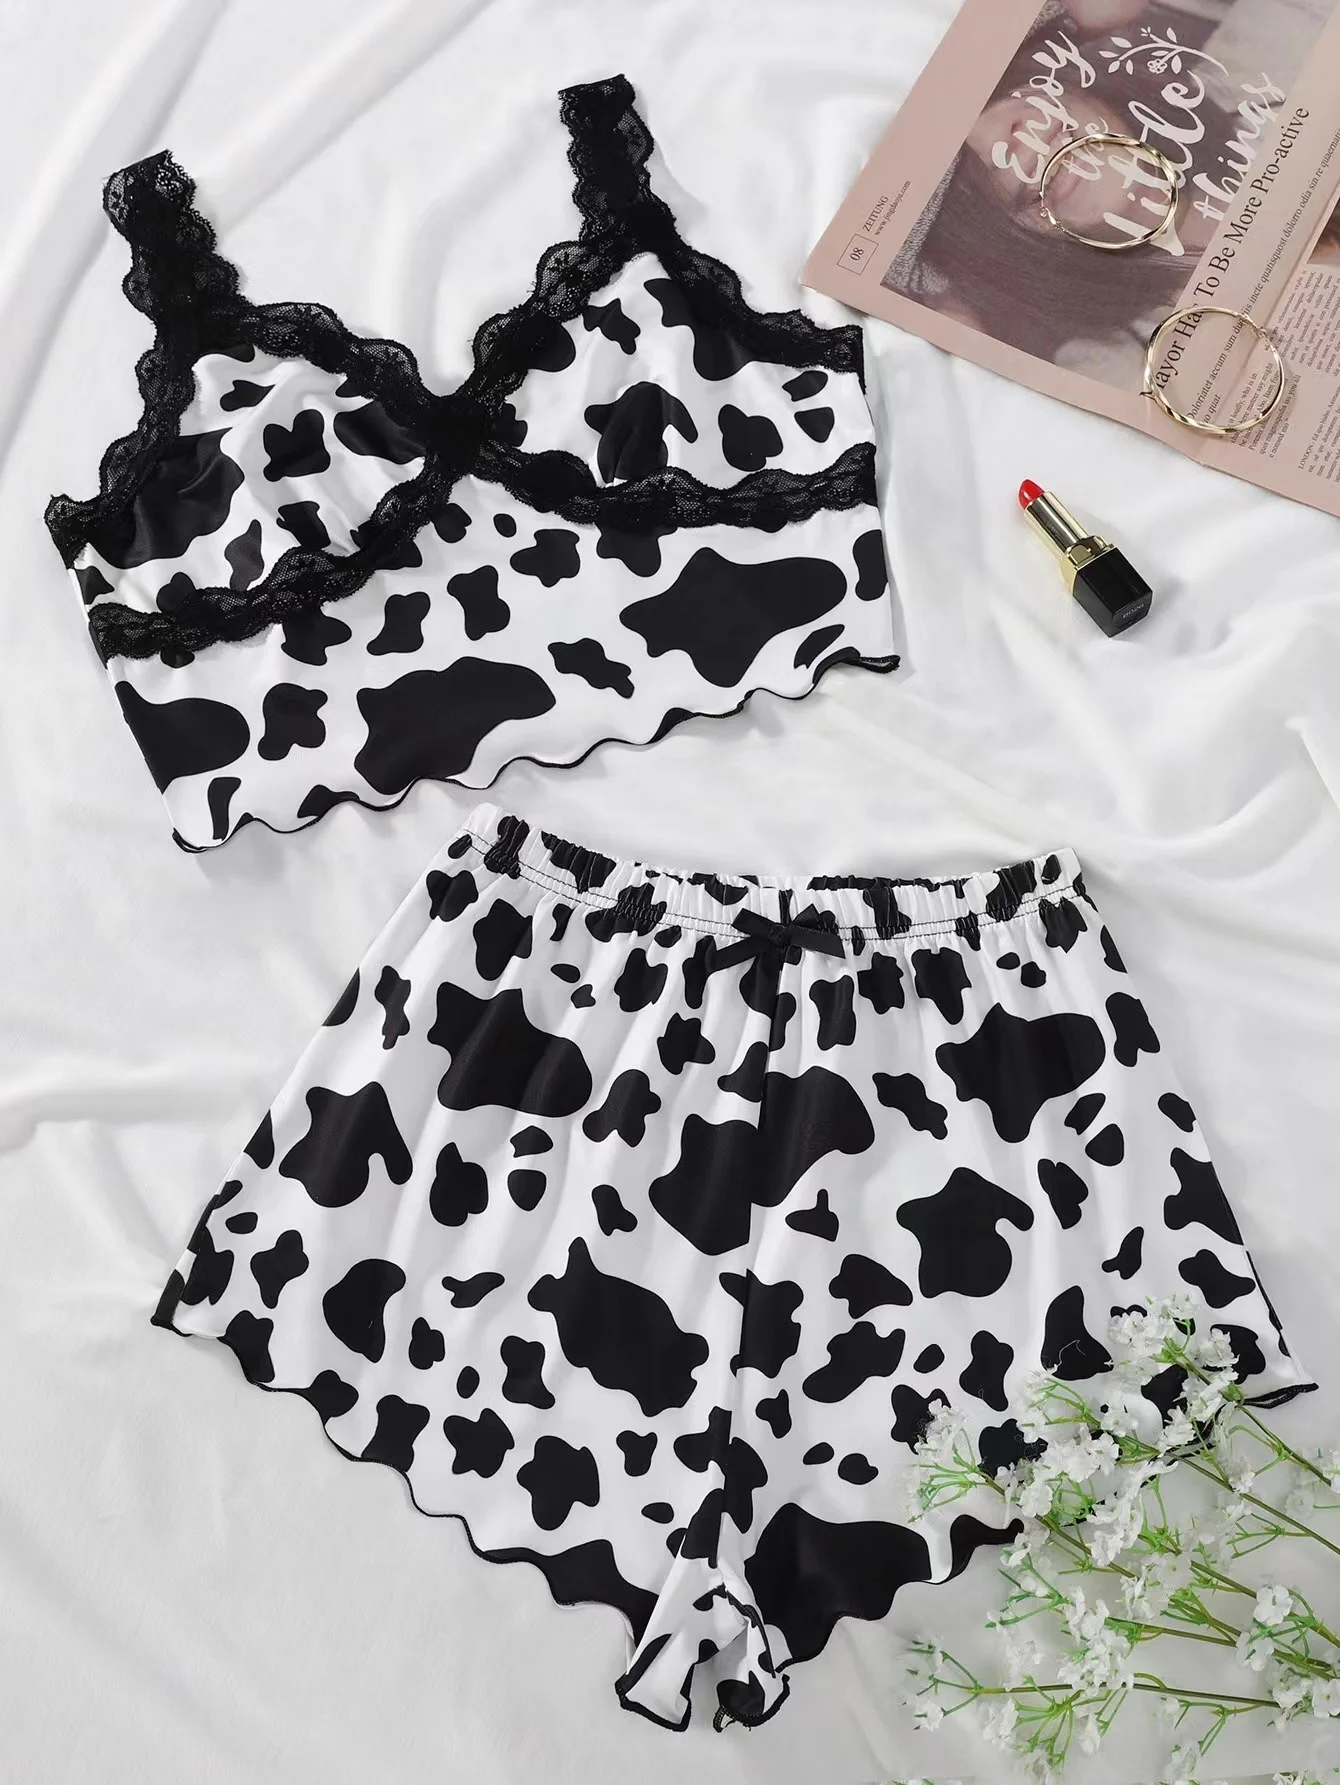 

New Style Lady's Summer Cow Pattern Lace Edge Camisole With Shorts Pajama Set Cute Comfort Sexy Home Wear Sleepwear Underwear